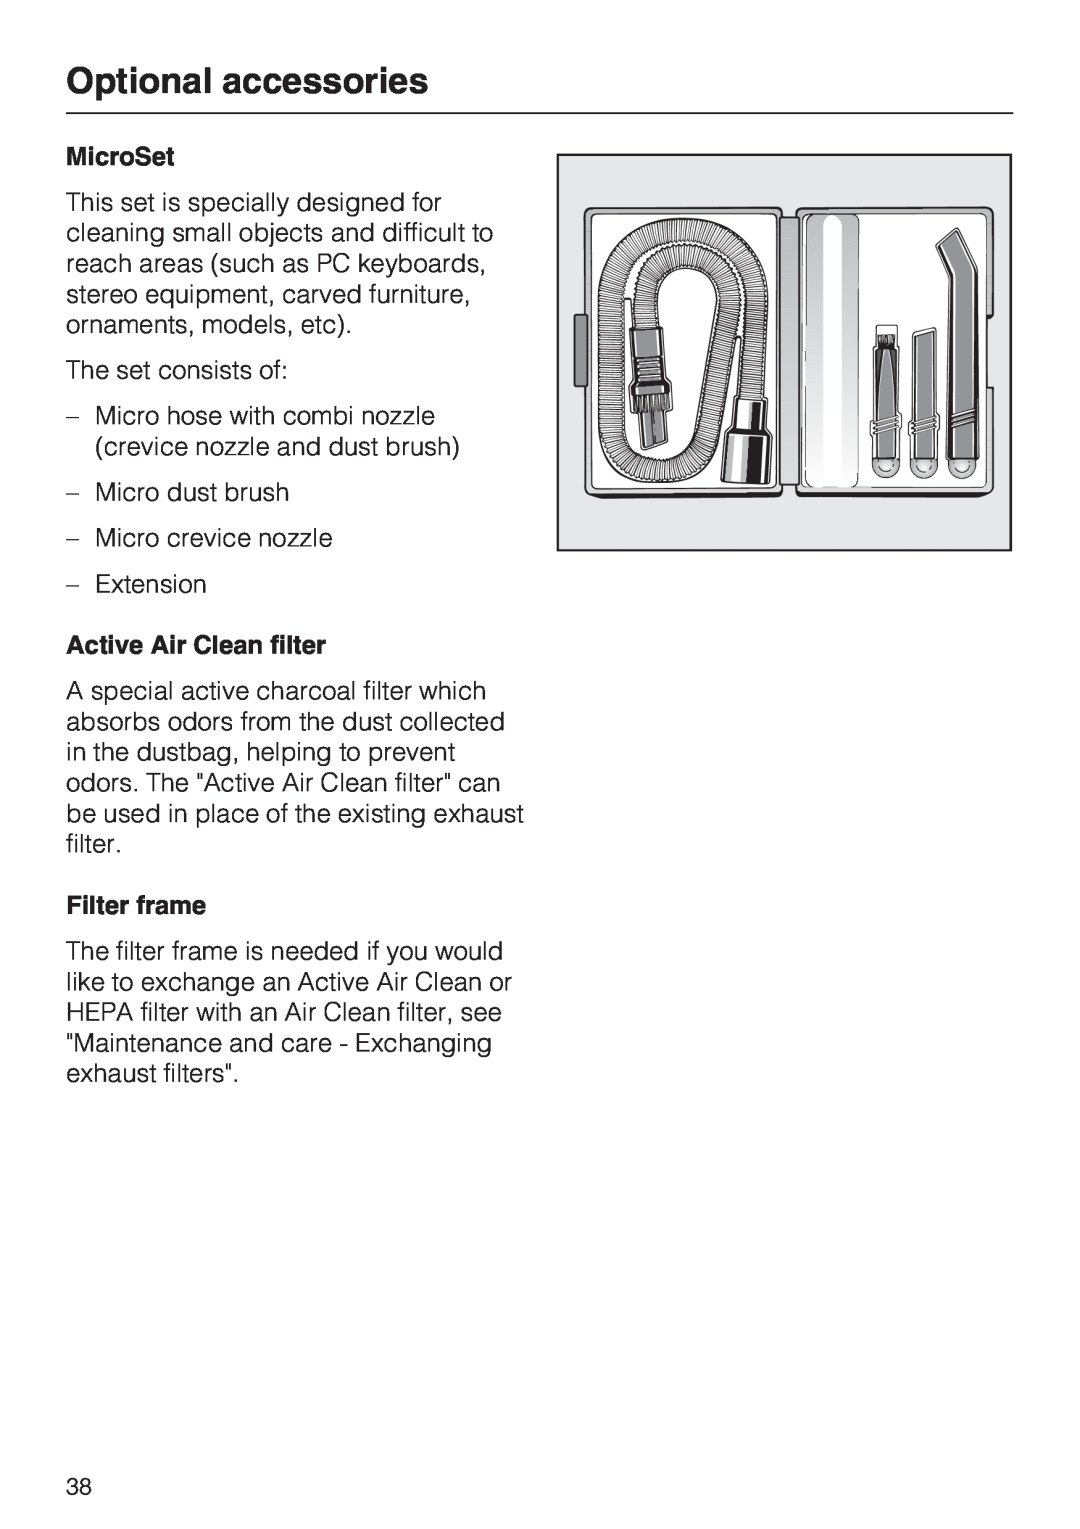 Miele S5981 operating instructions MicroSet, Active Air Clean filter, Filter frame, Optional accessories 